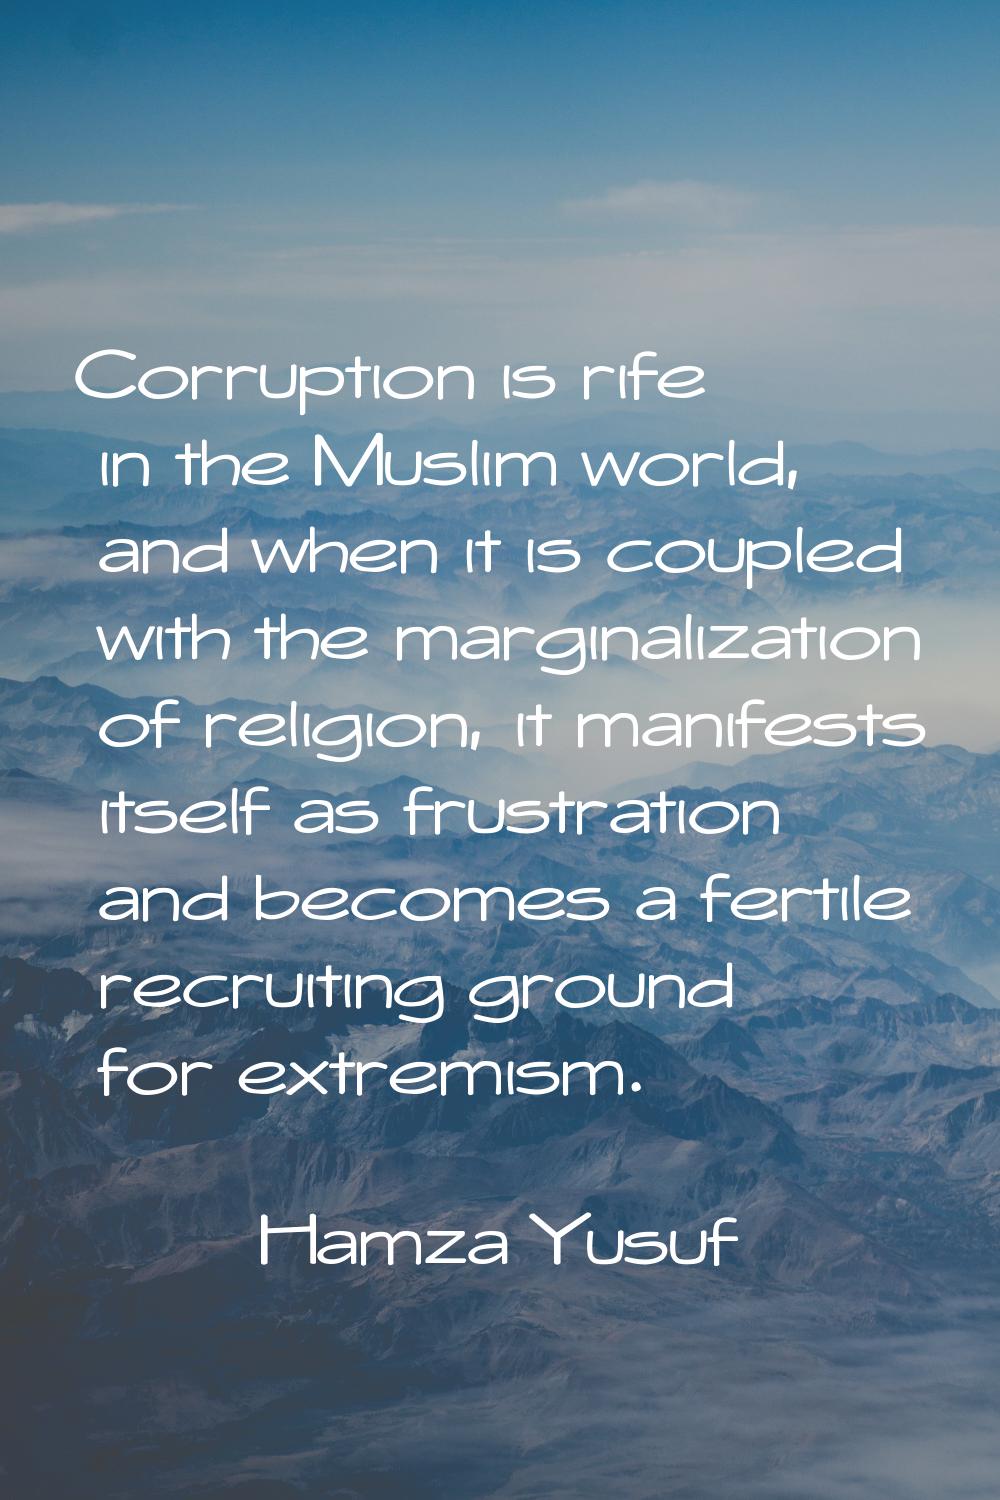 Corruption is rife in the Muslim world, and when it is coupled with the marginalization of religion